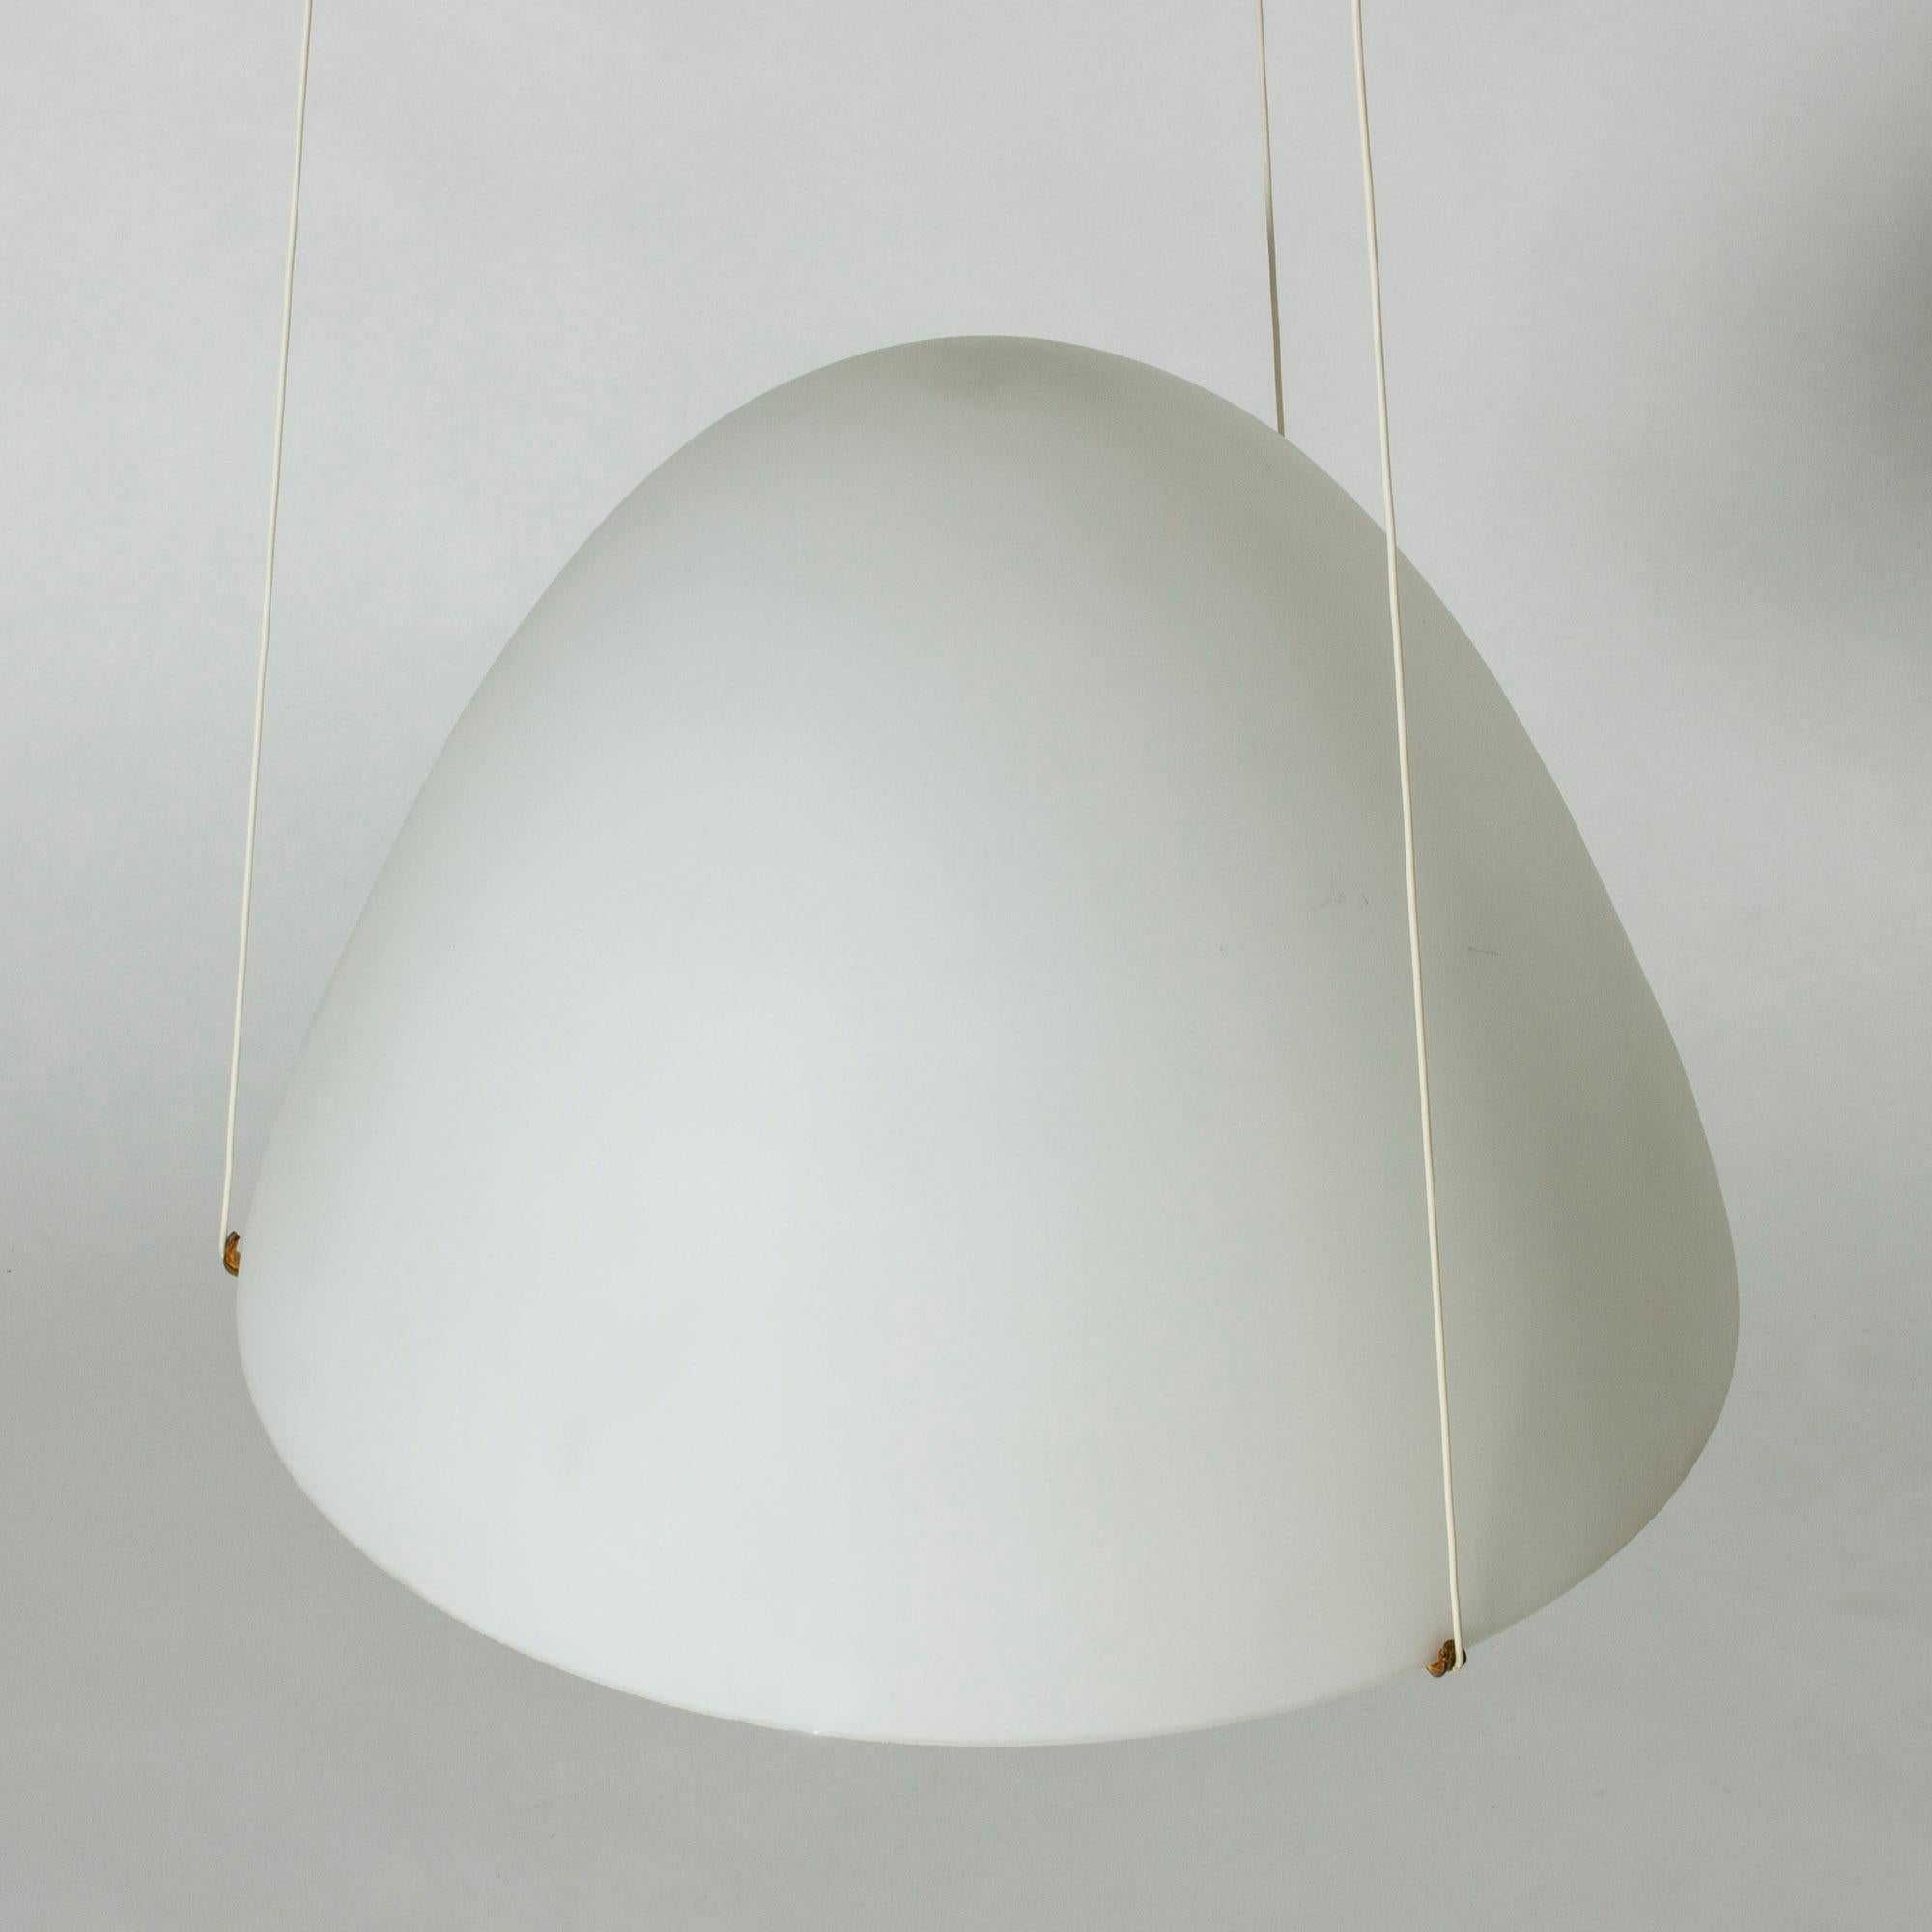 Stunning pendant light by Bertil Brisborg, made from opaline glass with brass details. The large shade is suspended on a slender brass frame whose arms the cords run through. A glass disc discreetly conceals the light source inside. Wonderful